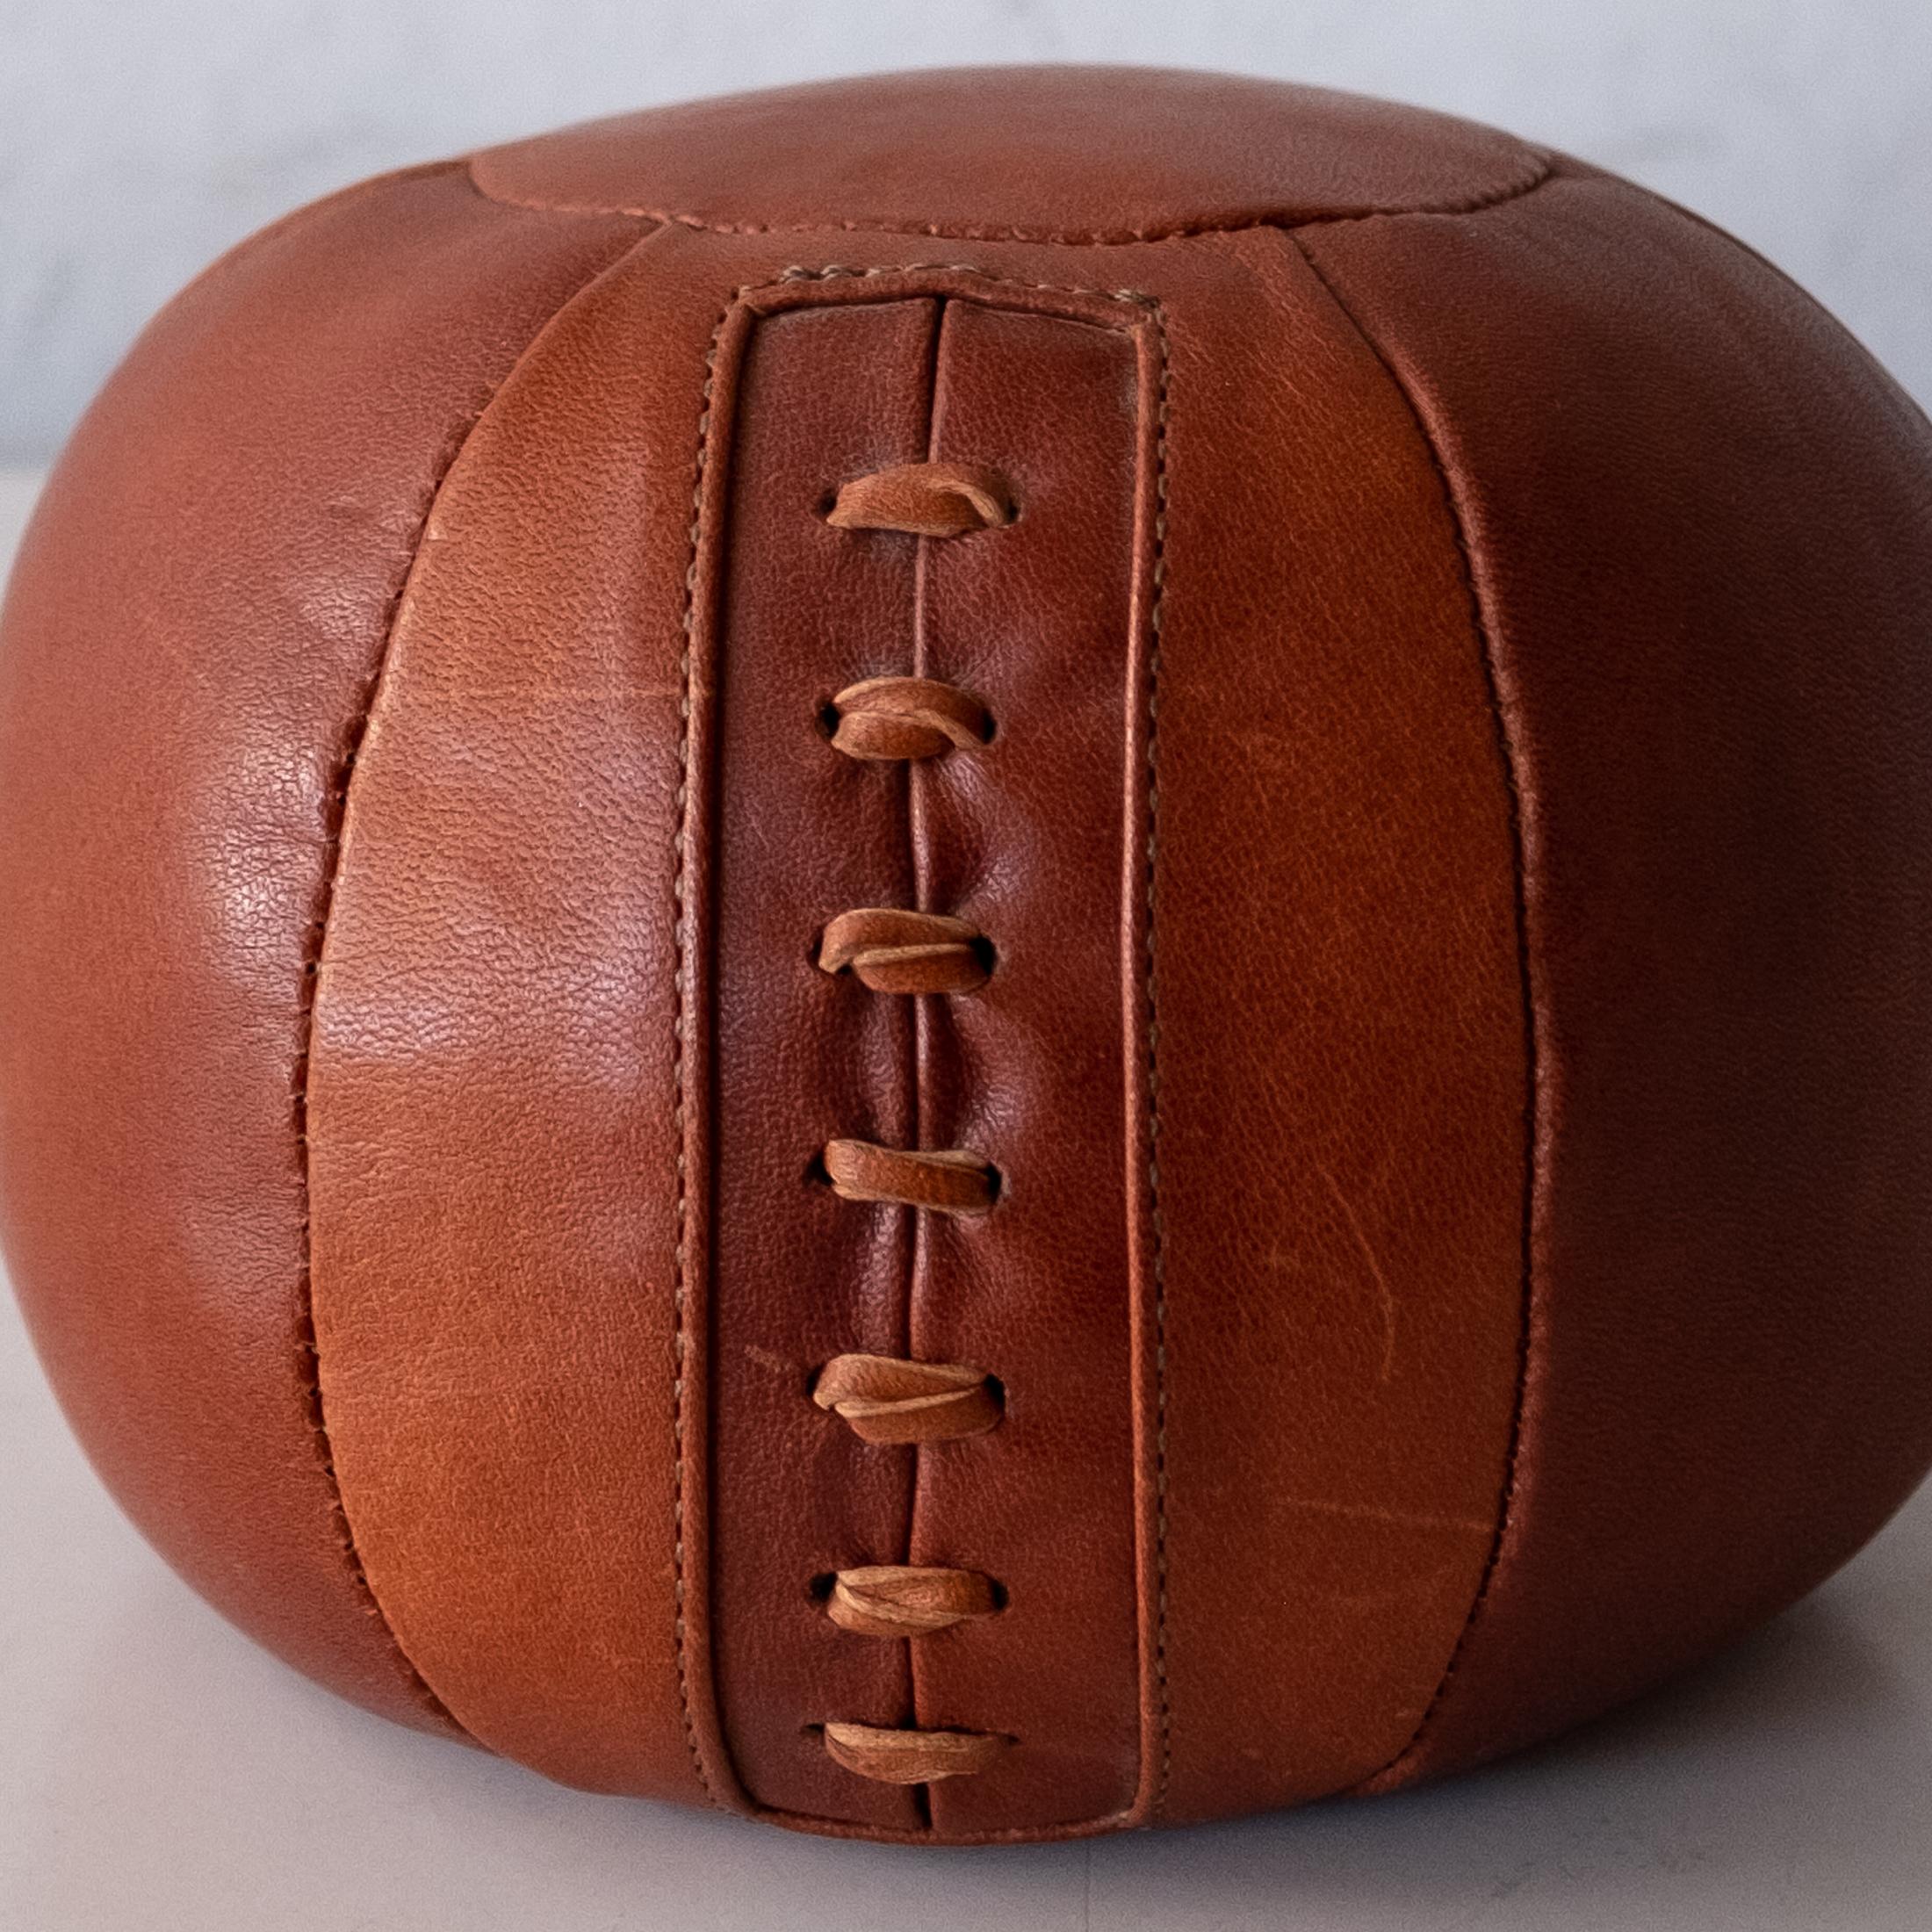 Cognac leather weighted medicine ball. Table top size to use as a decorative object or paperweight. Hand stitched high quality supple leather.